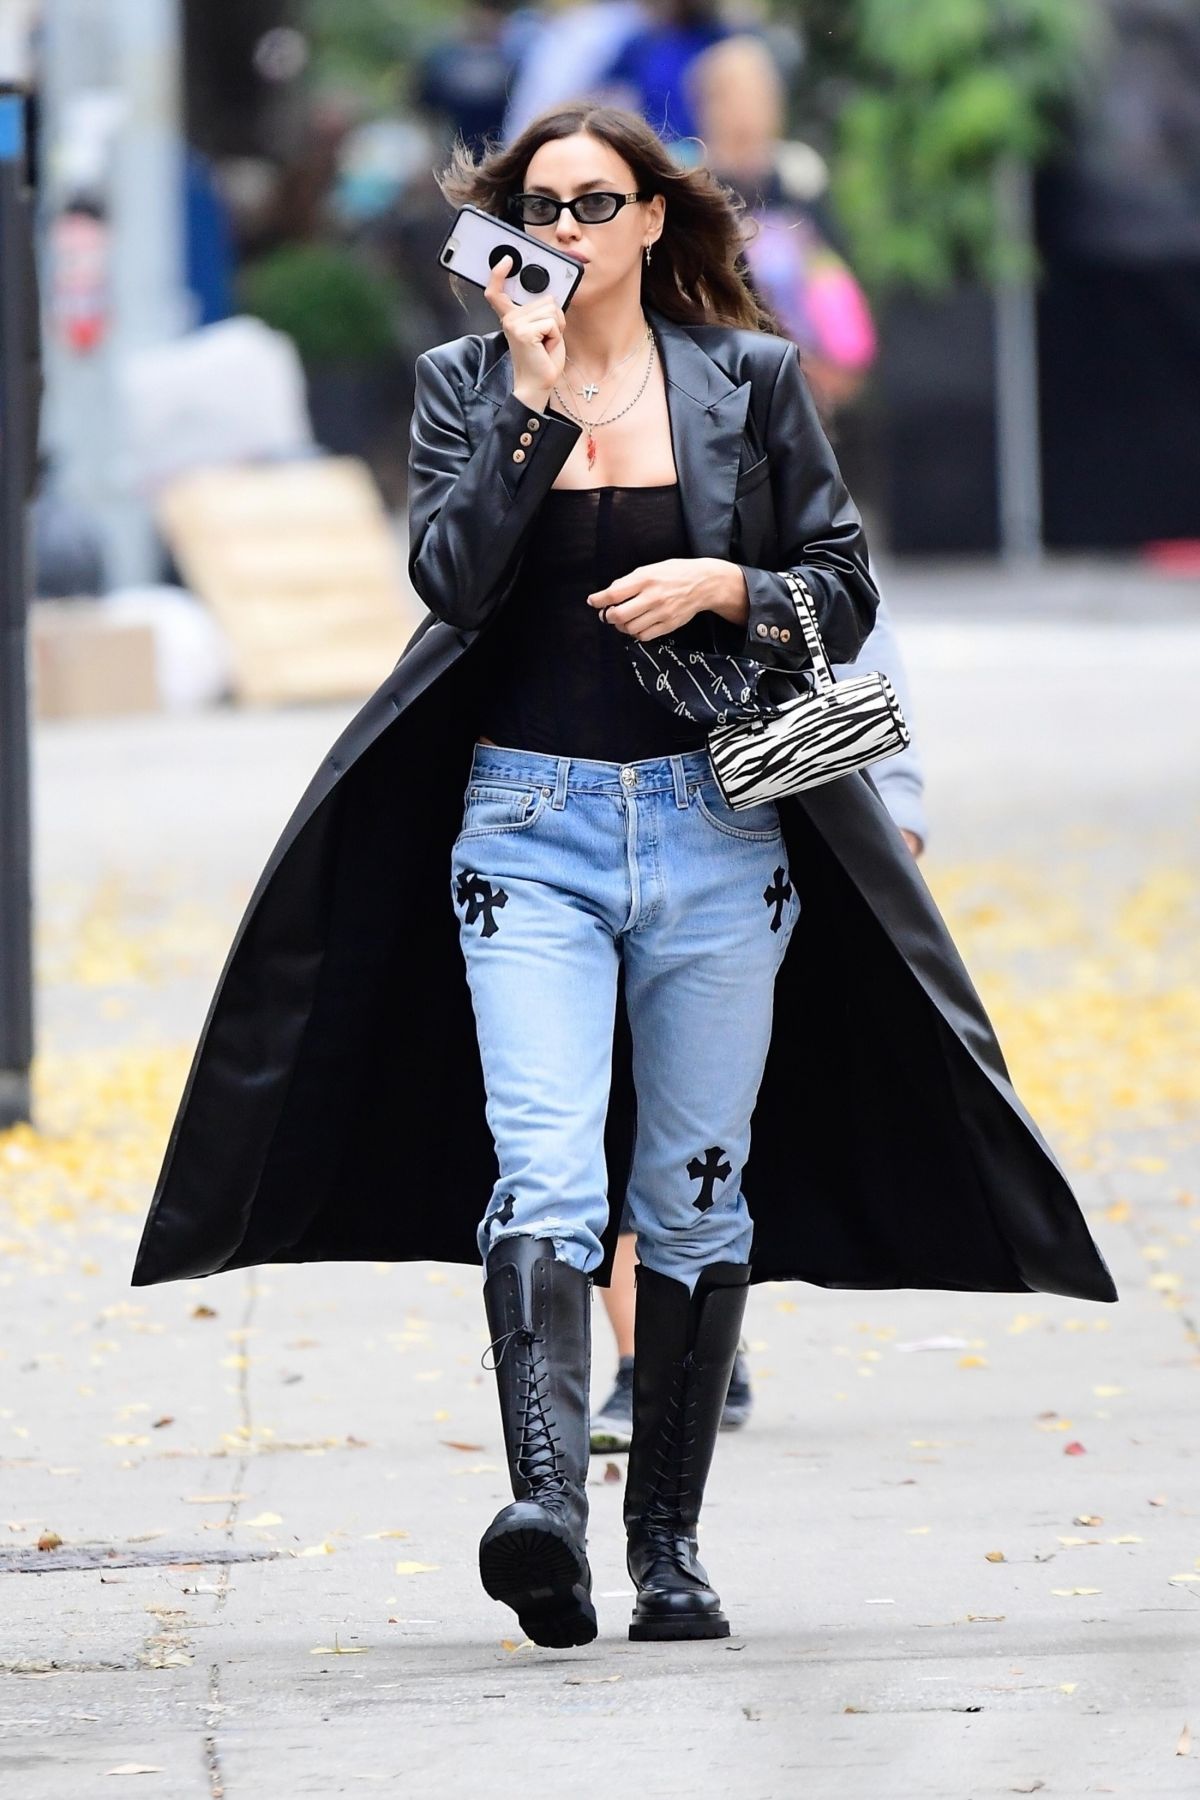 irina-shayk-out-and-about-in-new-york-11-11-2020-2.jpg